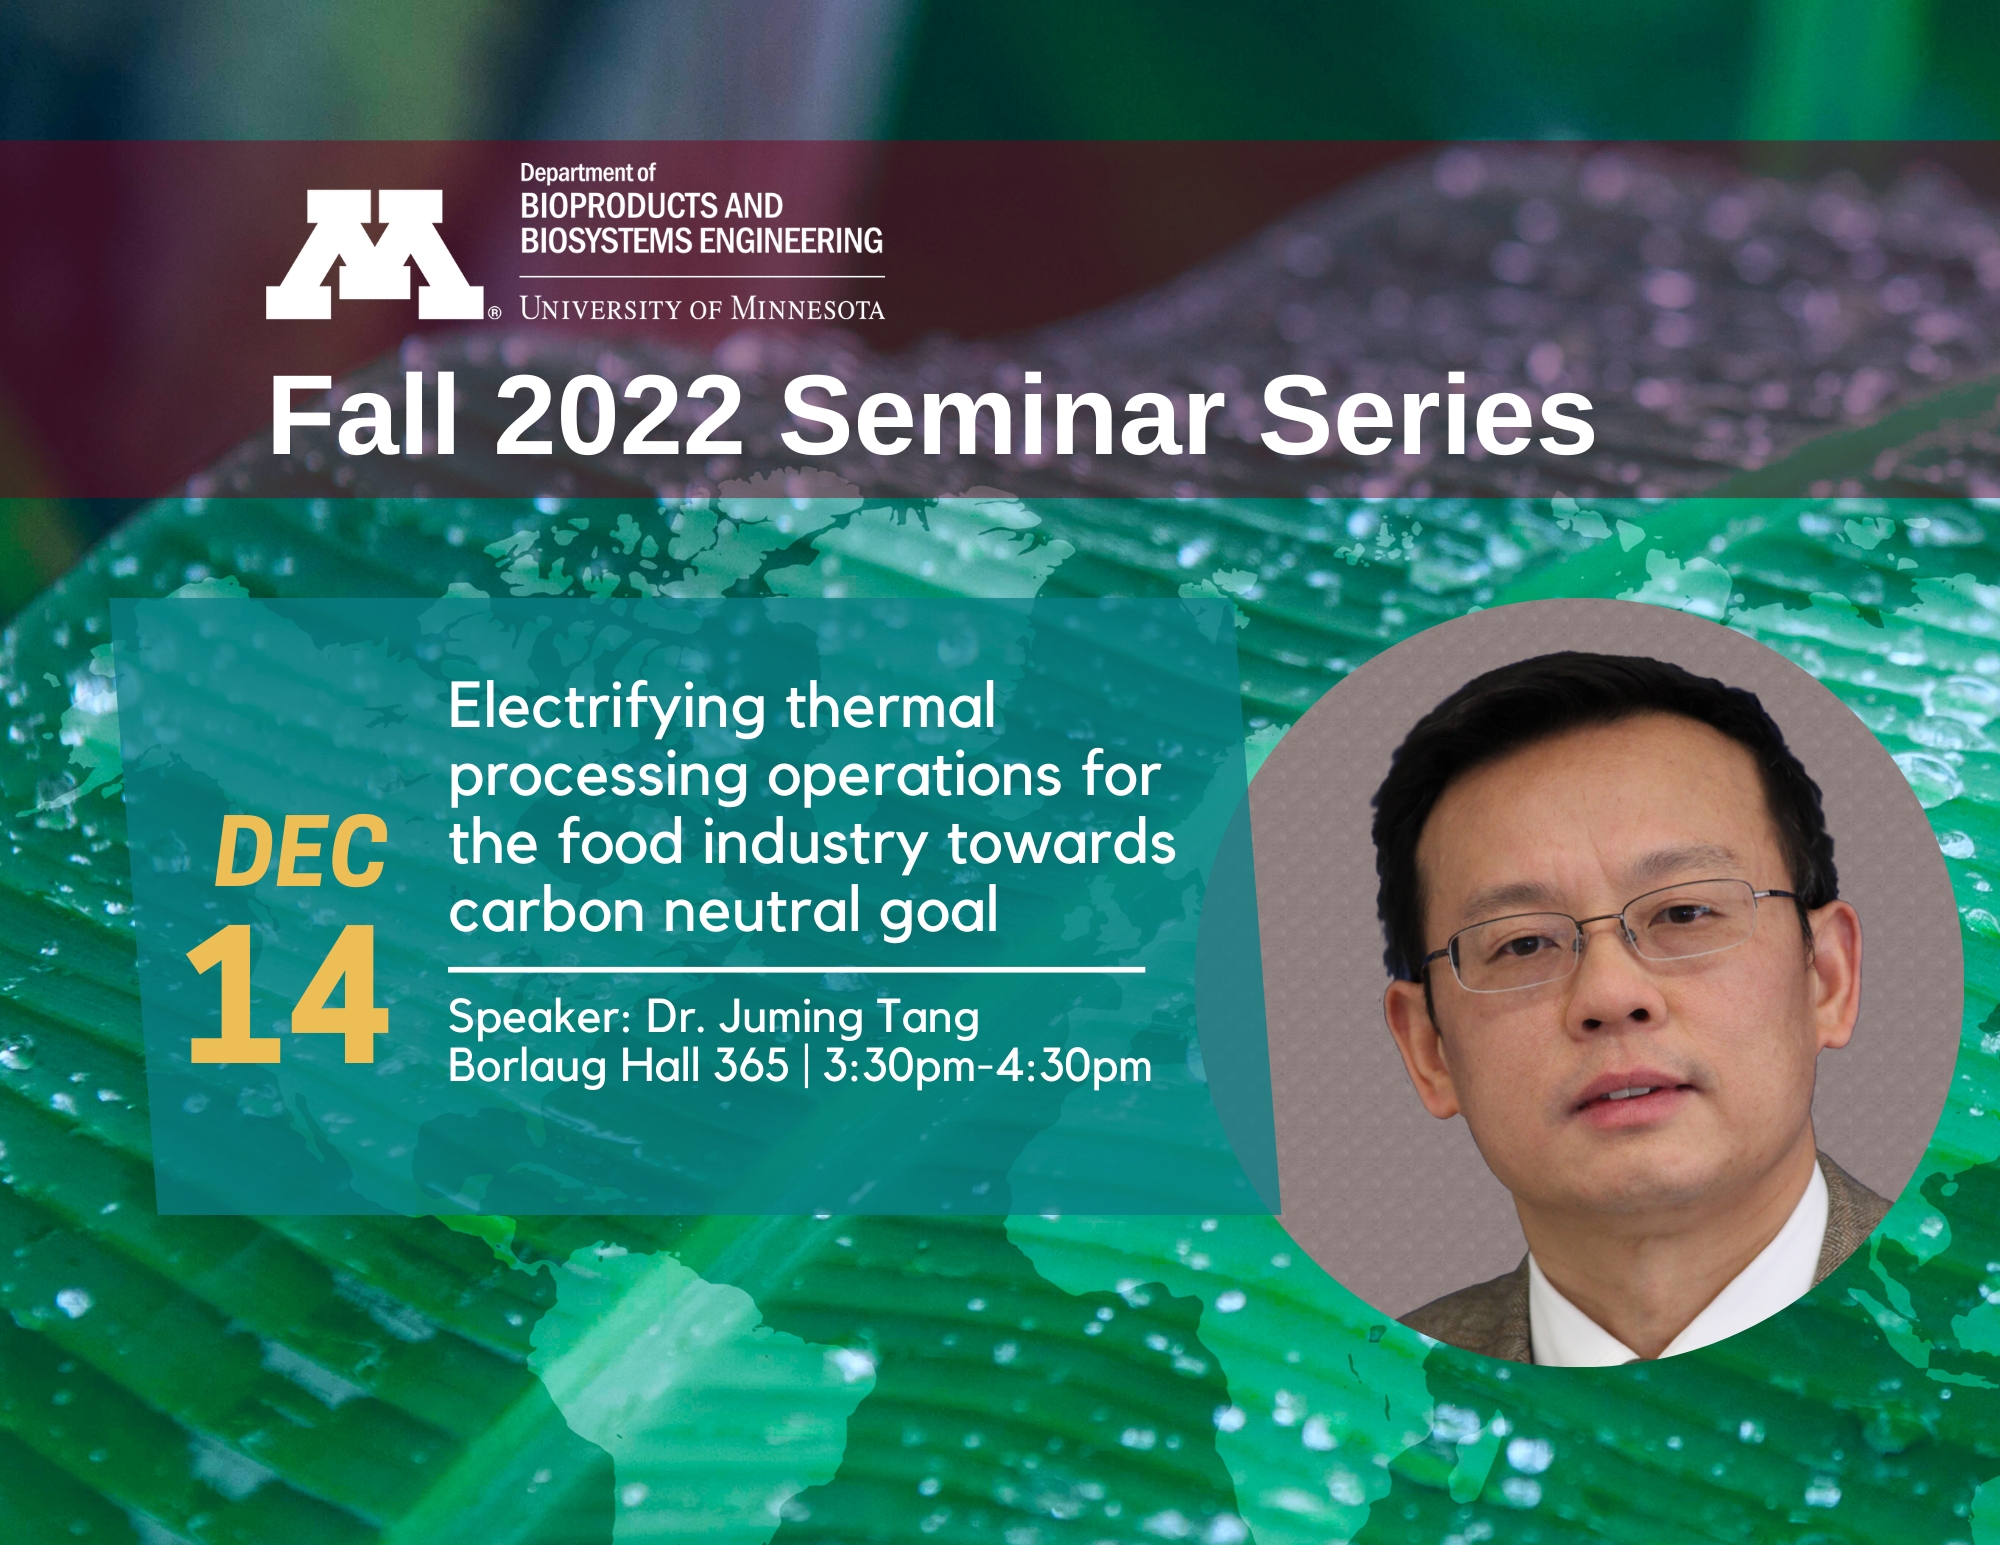 A graphic flyer for the BBE seminar presented by Dr. Juming Tang on 12/14/22.